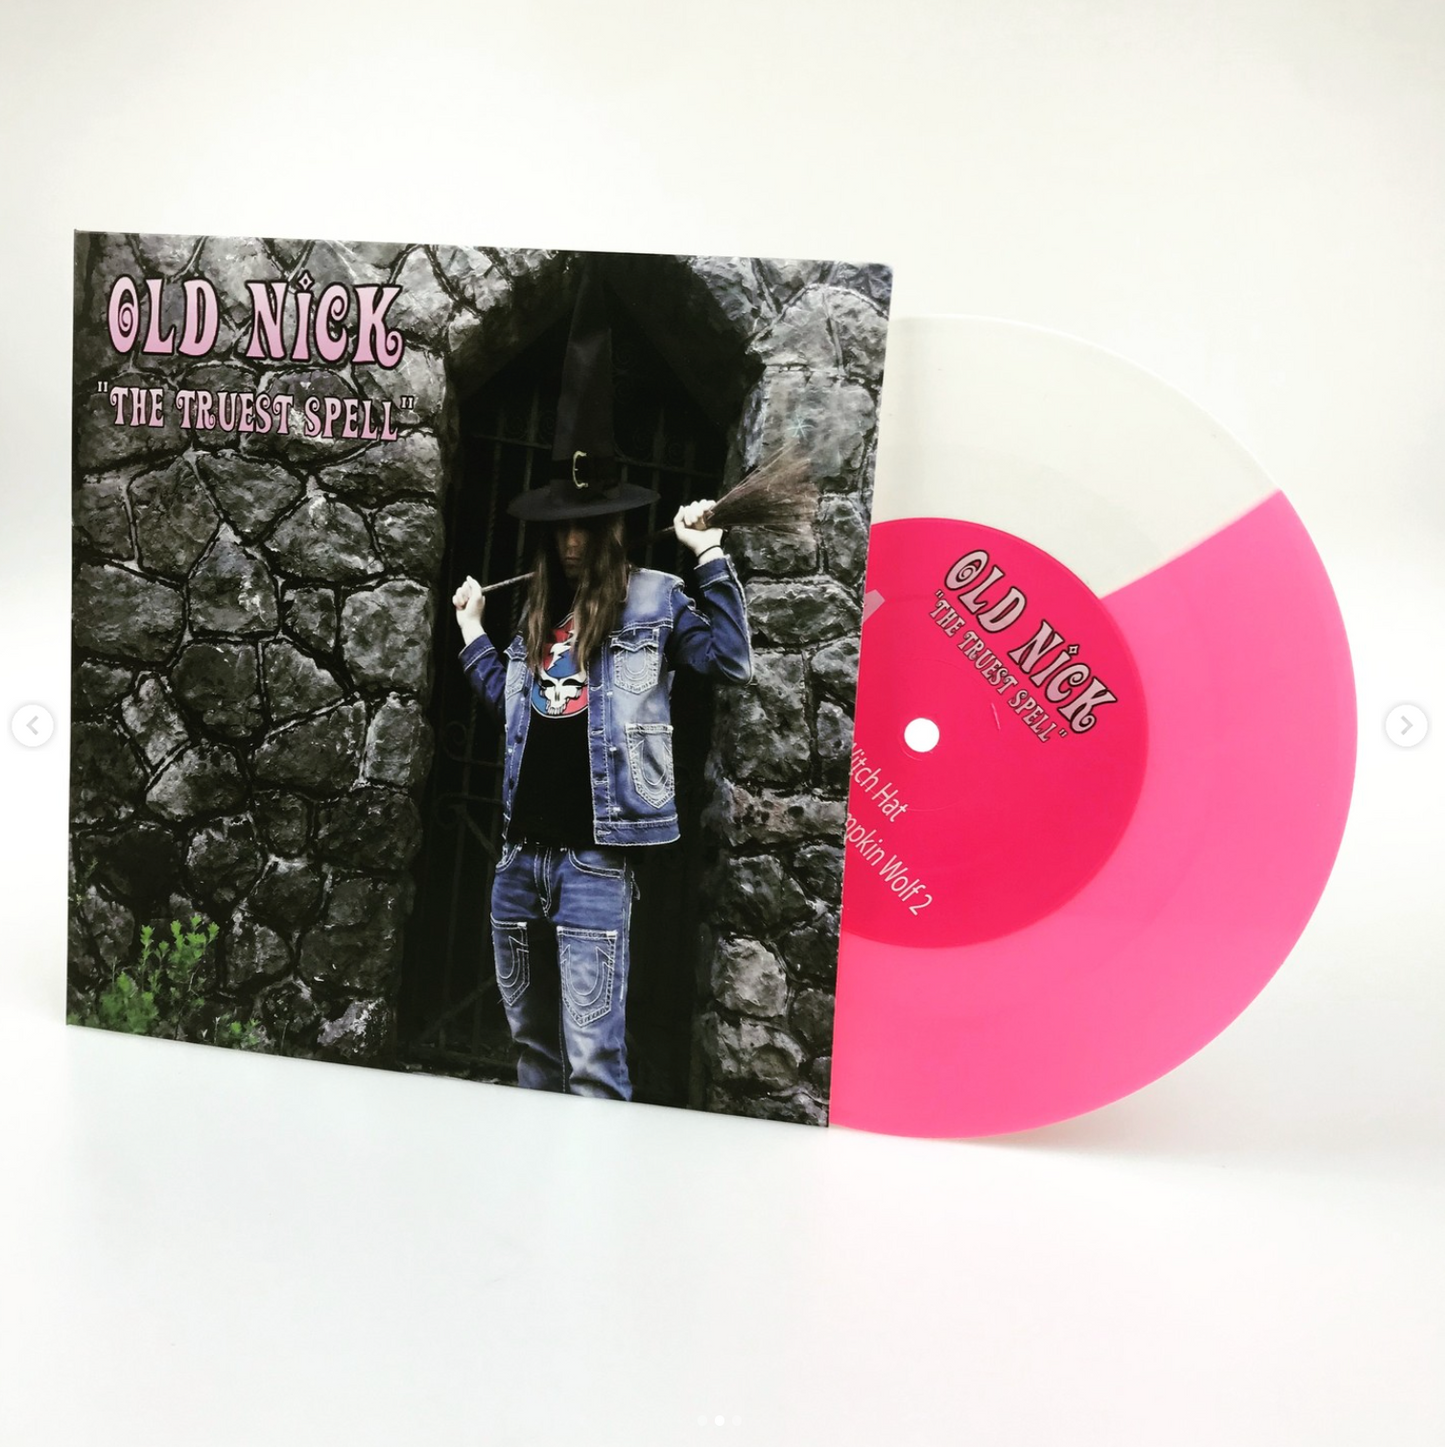 [SOLD OUT] OLD NICK "The Truest Spell" 7" vinyl EP (3 color options)